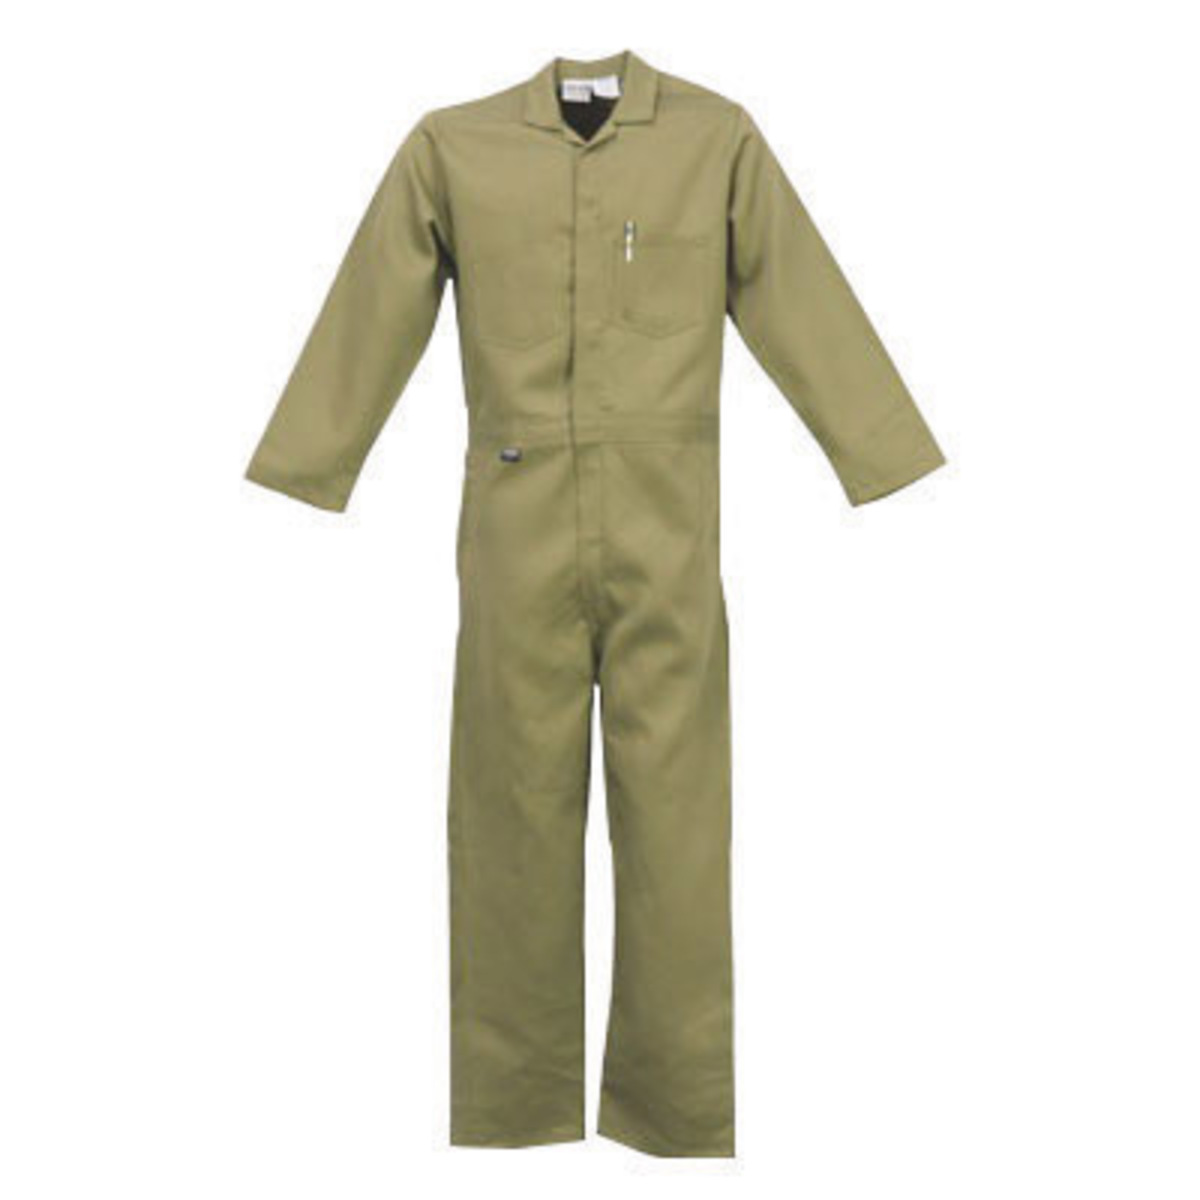 Stanco Safety Products™ X-Large Tan Indura® UltraSoft® Arc Rated Flame Resistant Coveralls With Front Zipper Closure